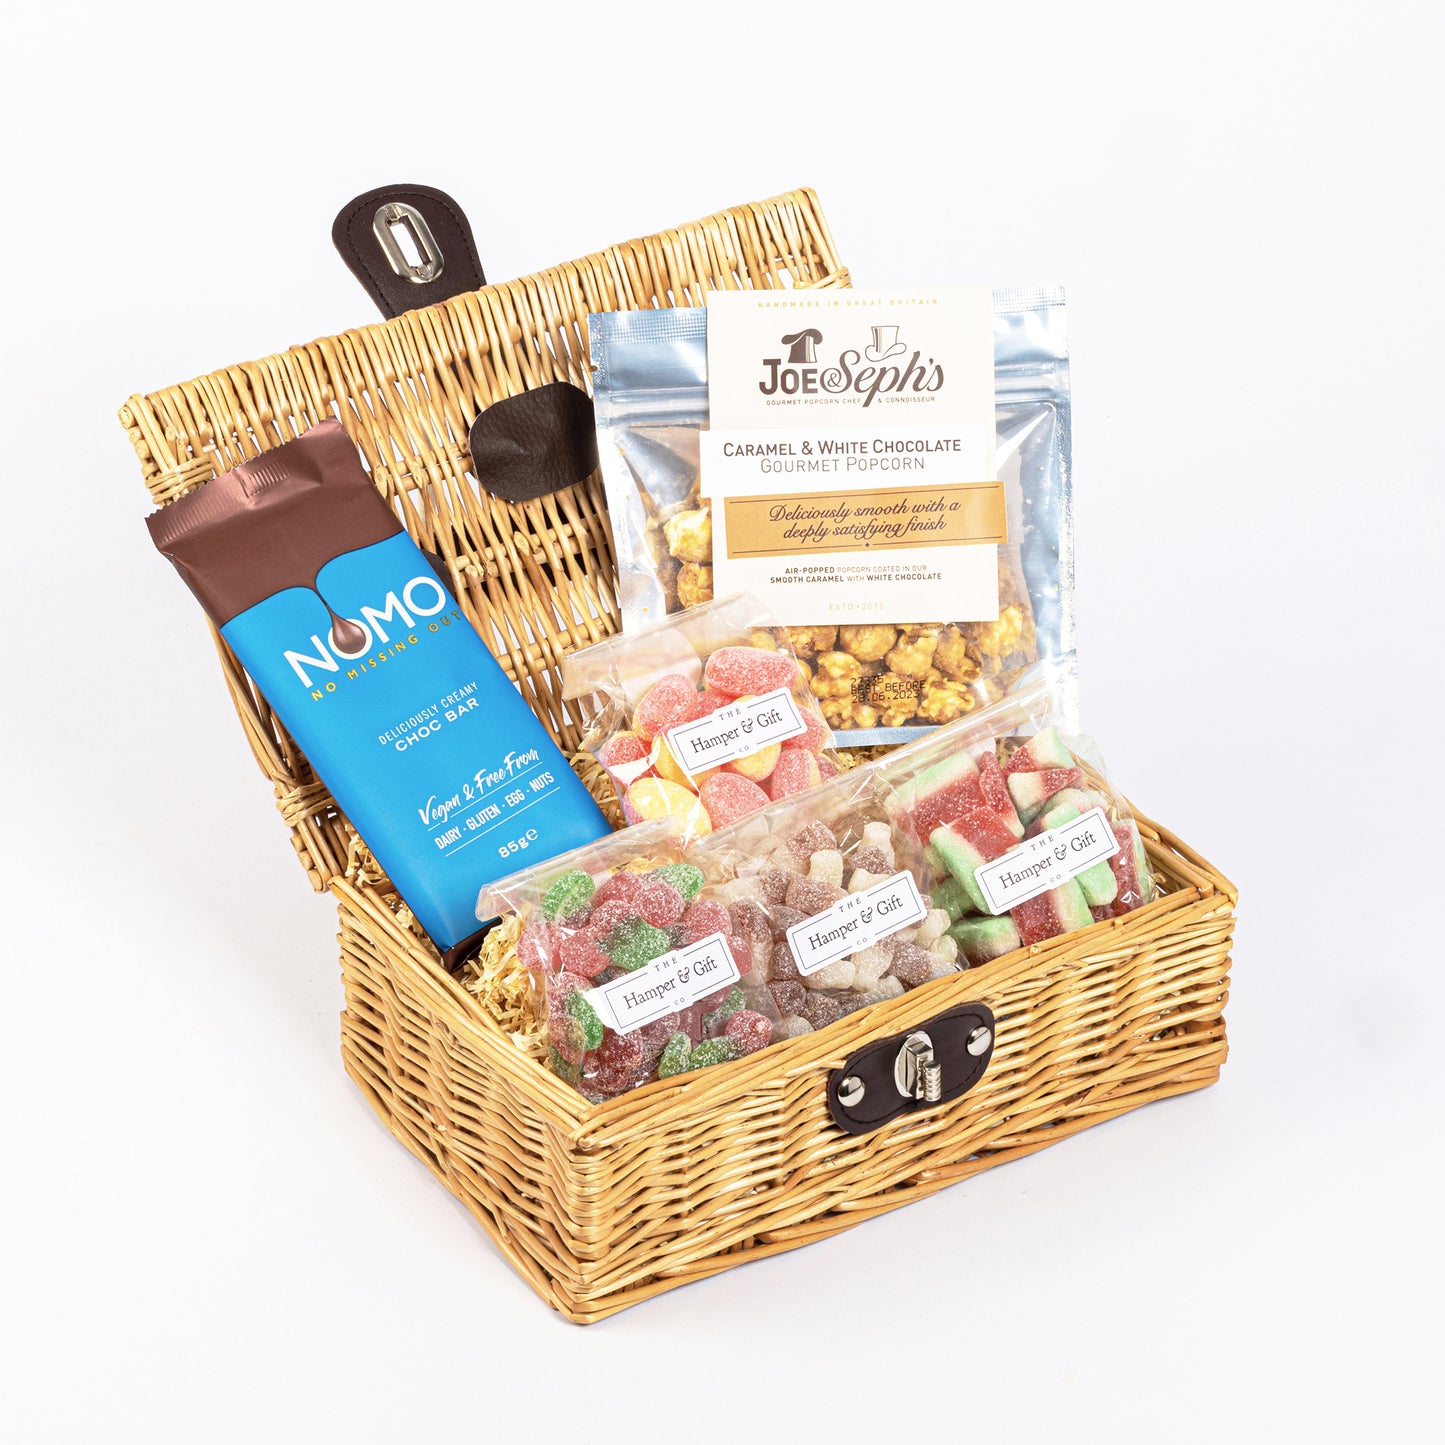 Little Gluten Free Hamper filled with a variety of chocolate, sweets and gourmet popcorn